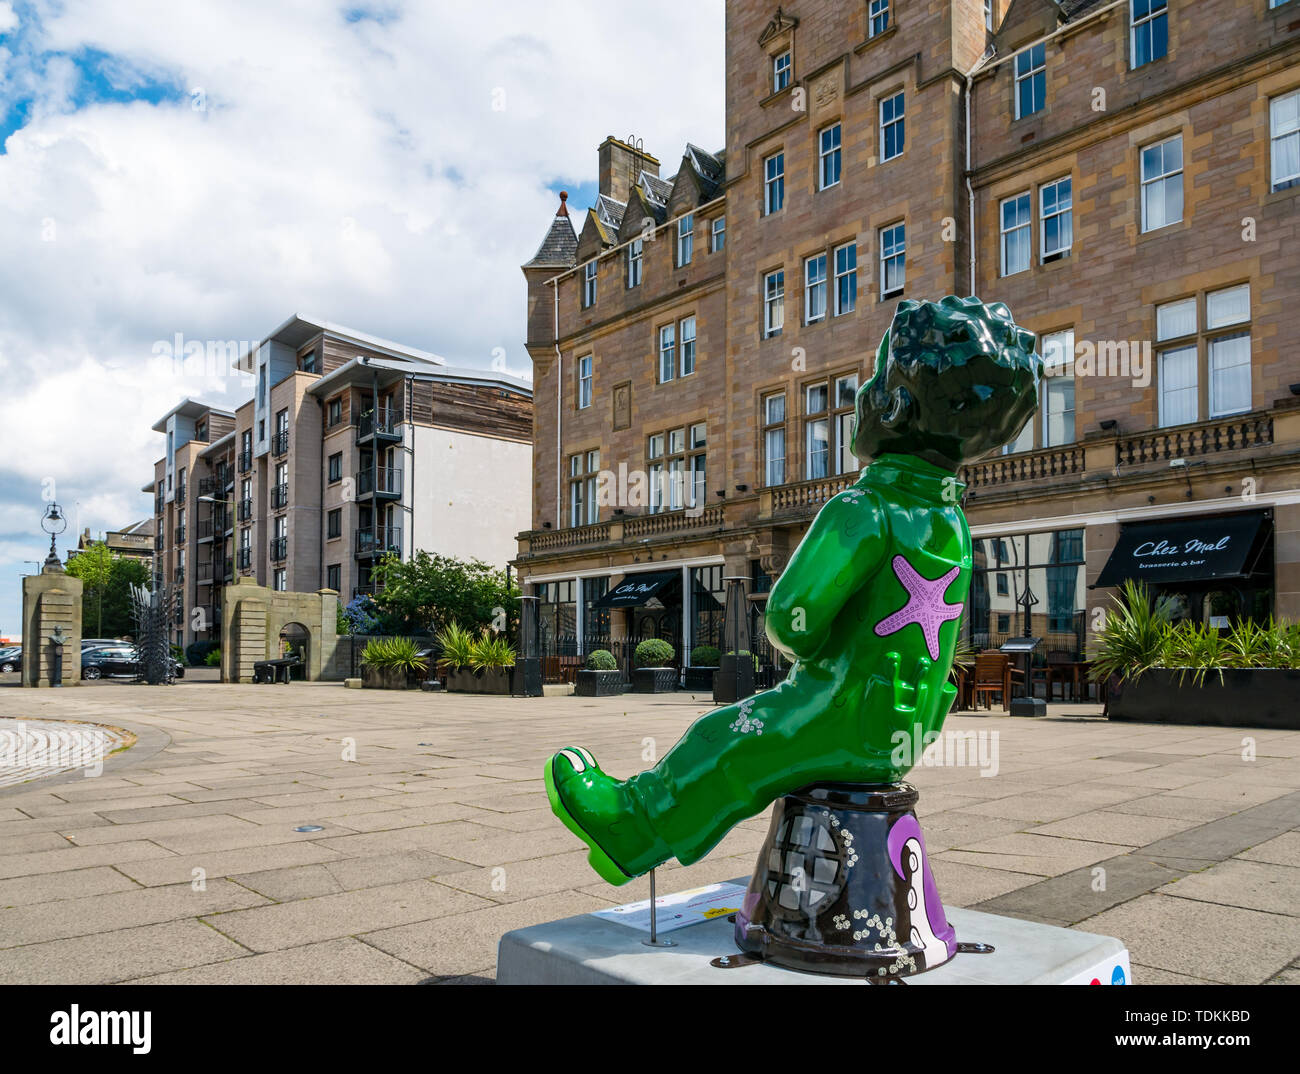 Leith, Edinburgh, Scotland, United Kingdom, 17 June 2019. Oor Wullie's Big Bucket Trail: An art trail of 200 Oor Wullie sculptures appear in Scottish cities in a mass arts event that lasts until August 30th. Oor Wullie is an iconic Scottish cartoon character. The sculptures will be auctioned to raise money for charities There are 5 in the Leith area, and 60 in Edinburgh altogether. Oor Wullie by Ruairidh Brunton outside Malmaison hotel in Tower lace Stock Photo